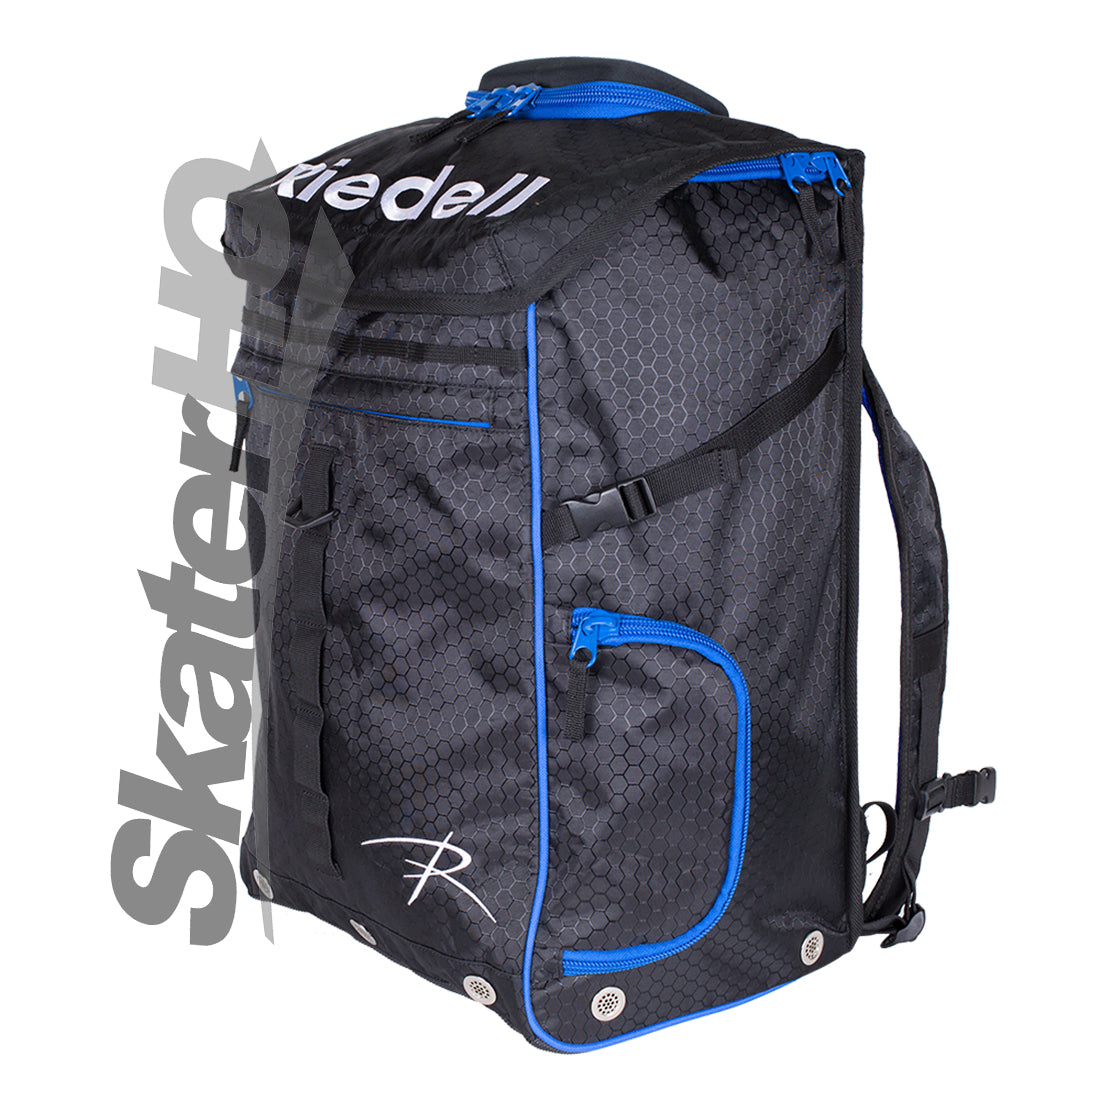 Riedell RXT Backpack - Black/Blue Bags and Backpacks